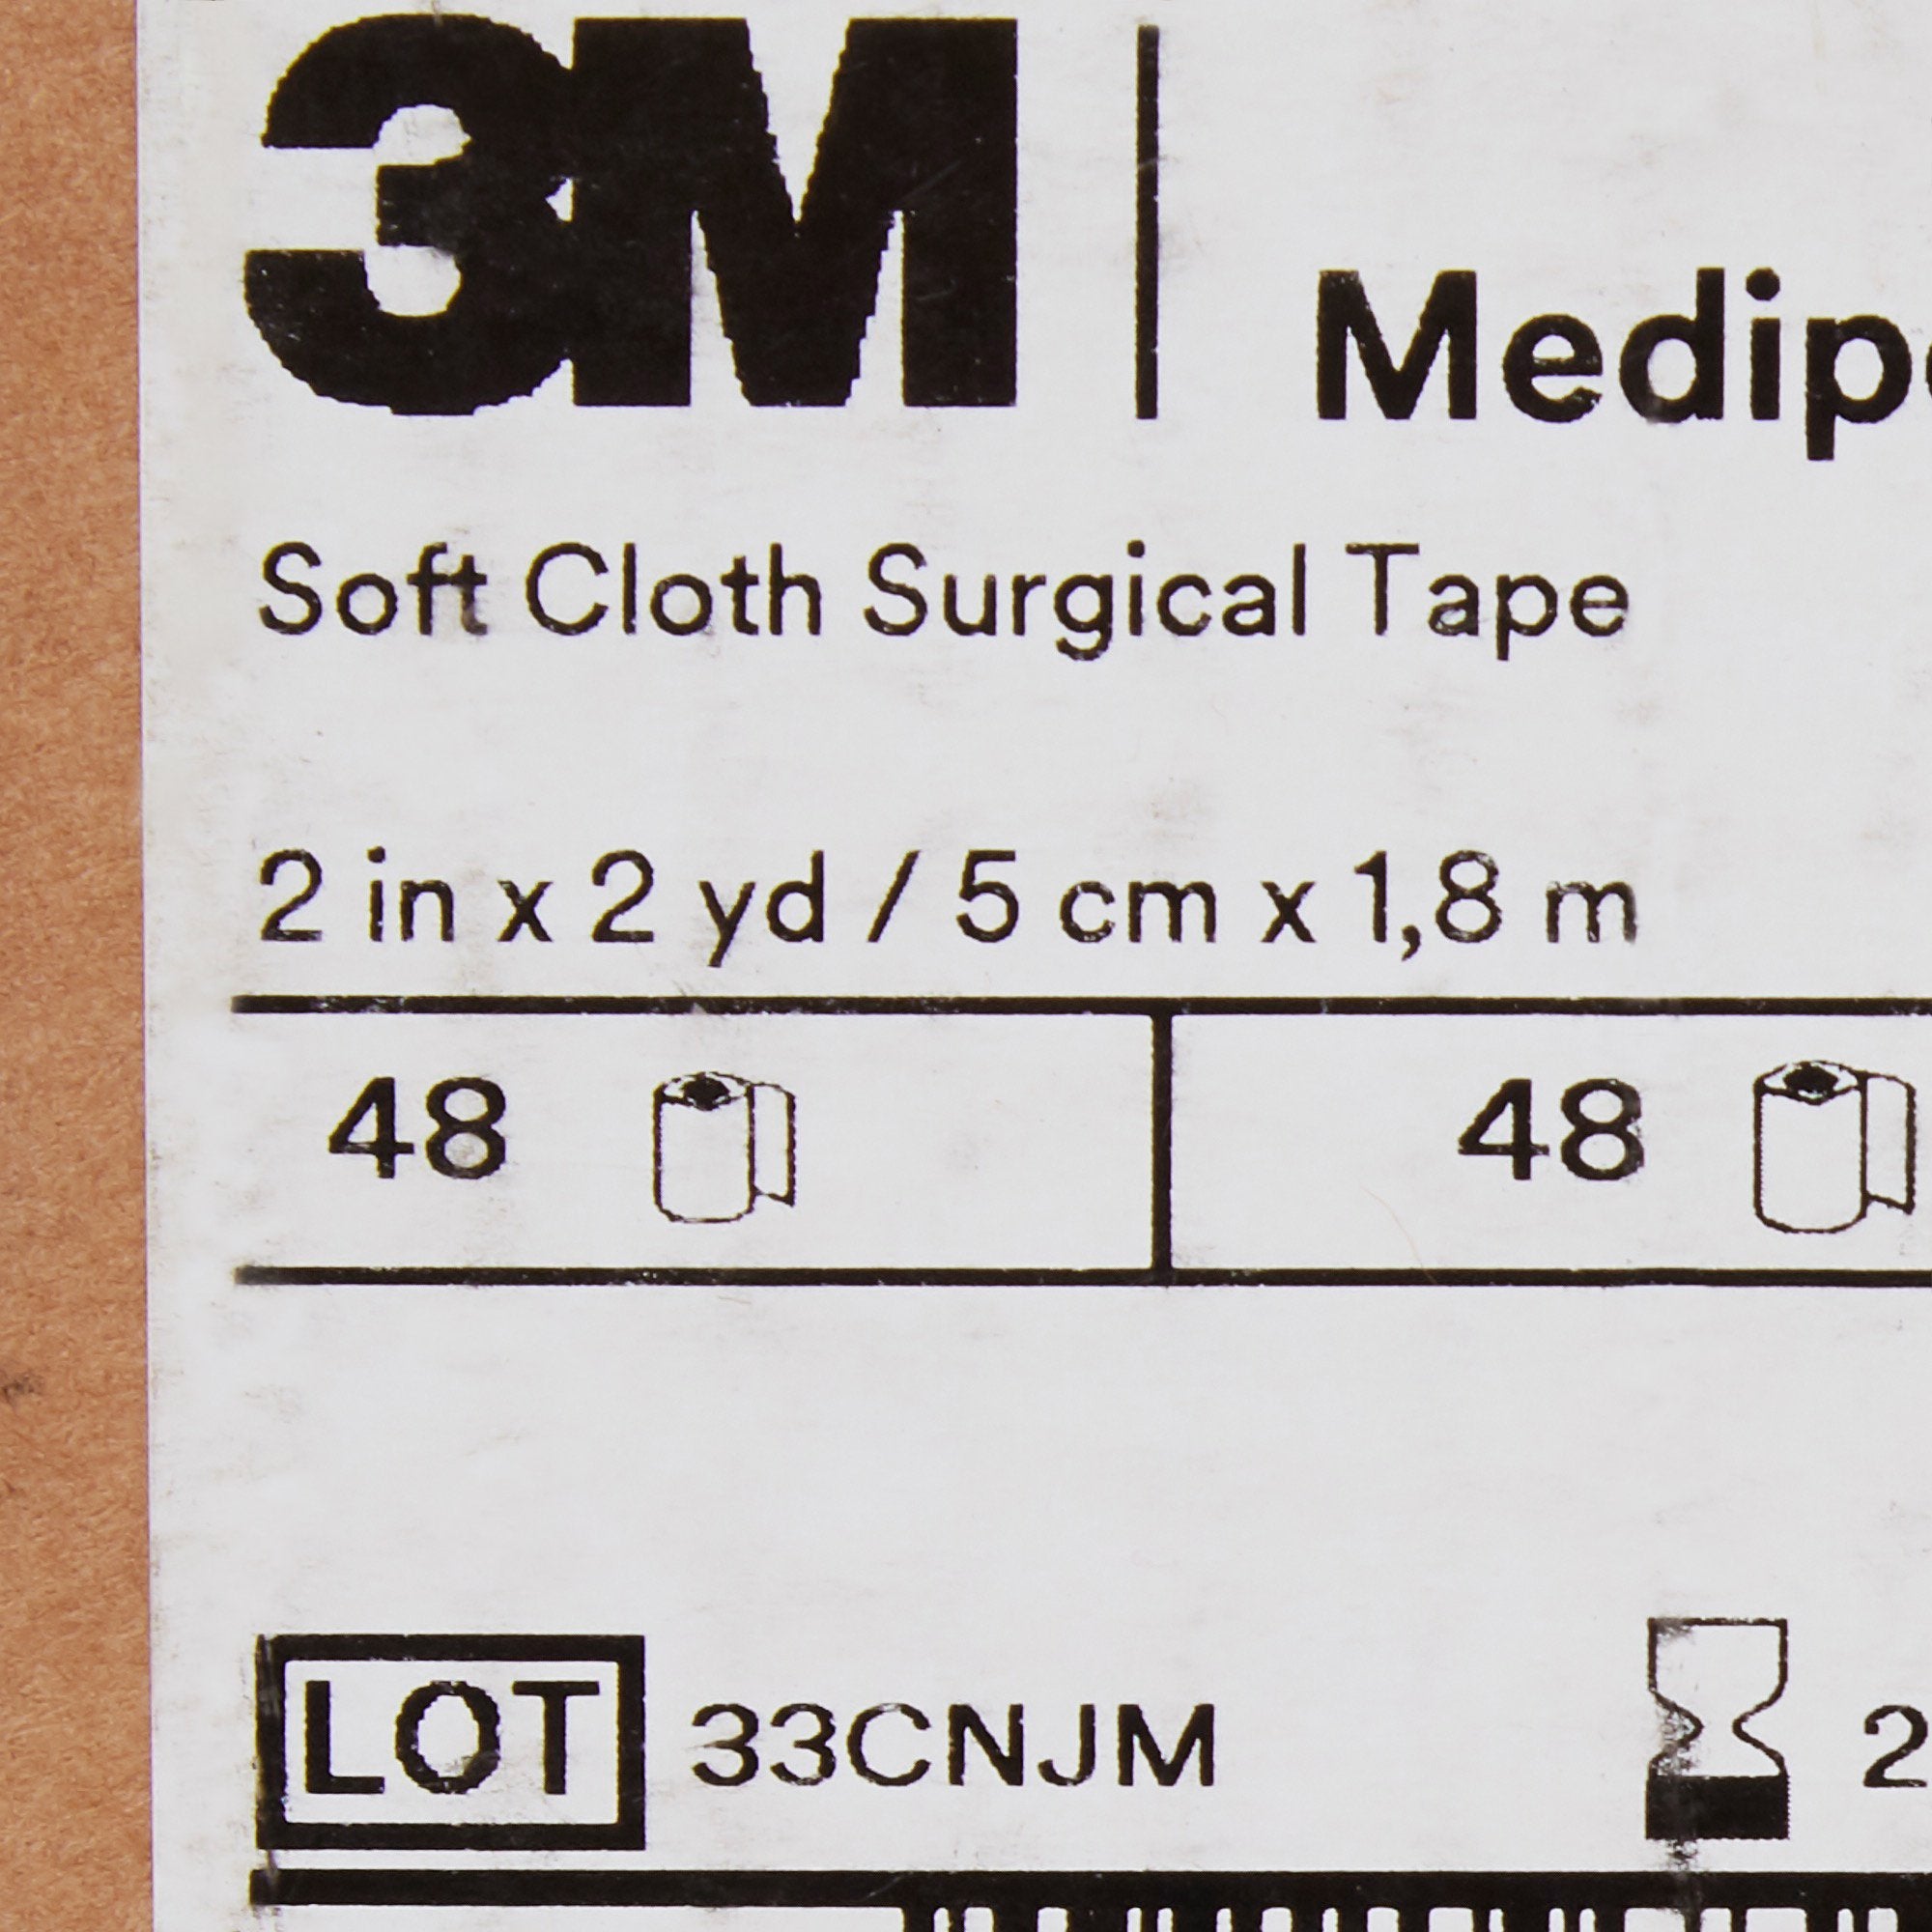  3M Medipore H Soft Cloth Surgical Tape - 4 wide by 10 yards :  Industrial & Scientific